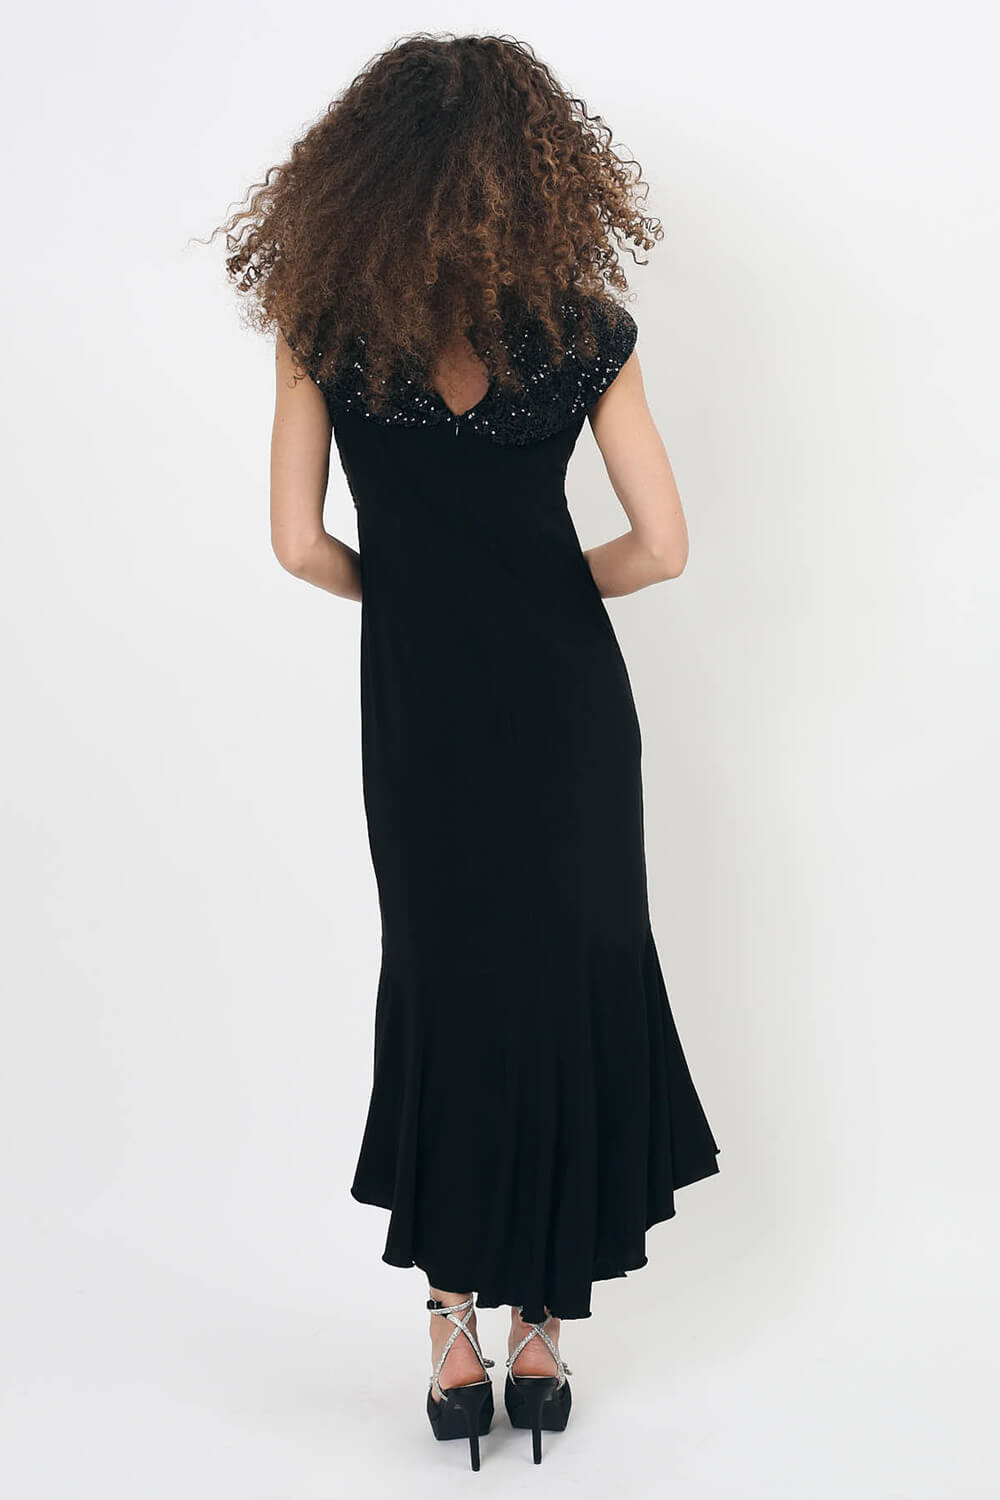 Black Julianna Fishtail Sequin Fitted Dress, Image 2 of 3